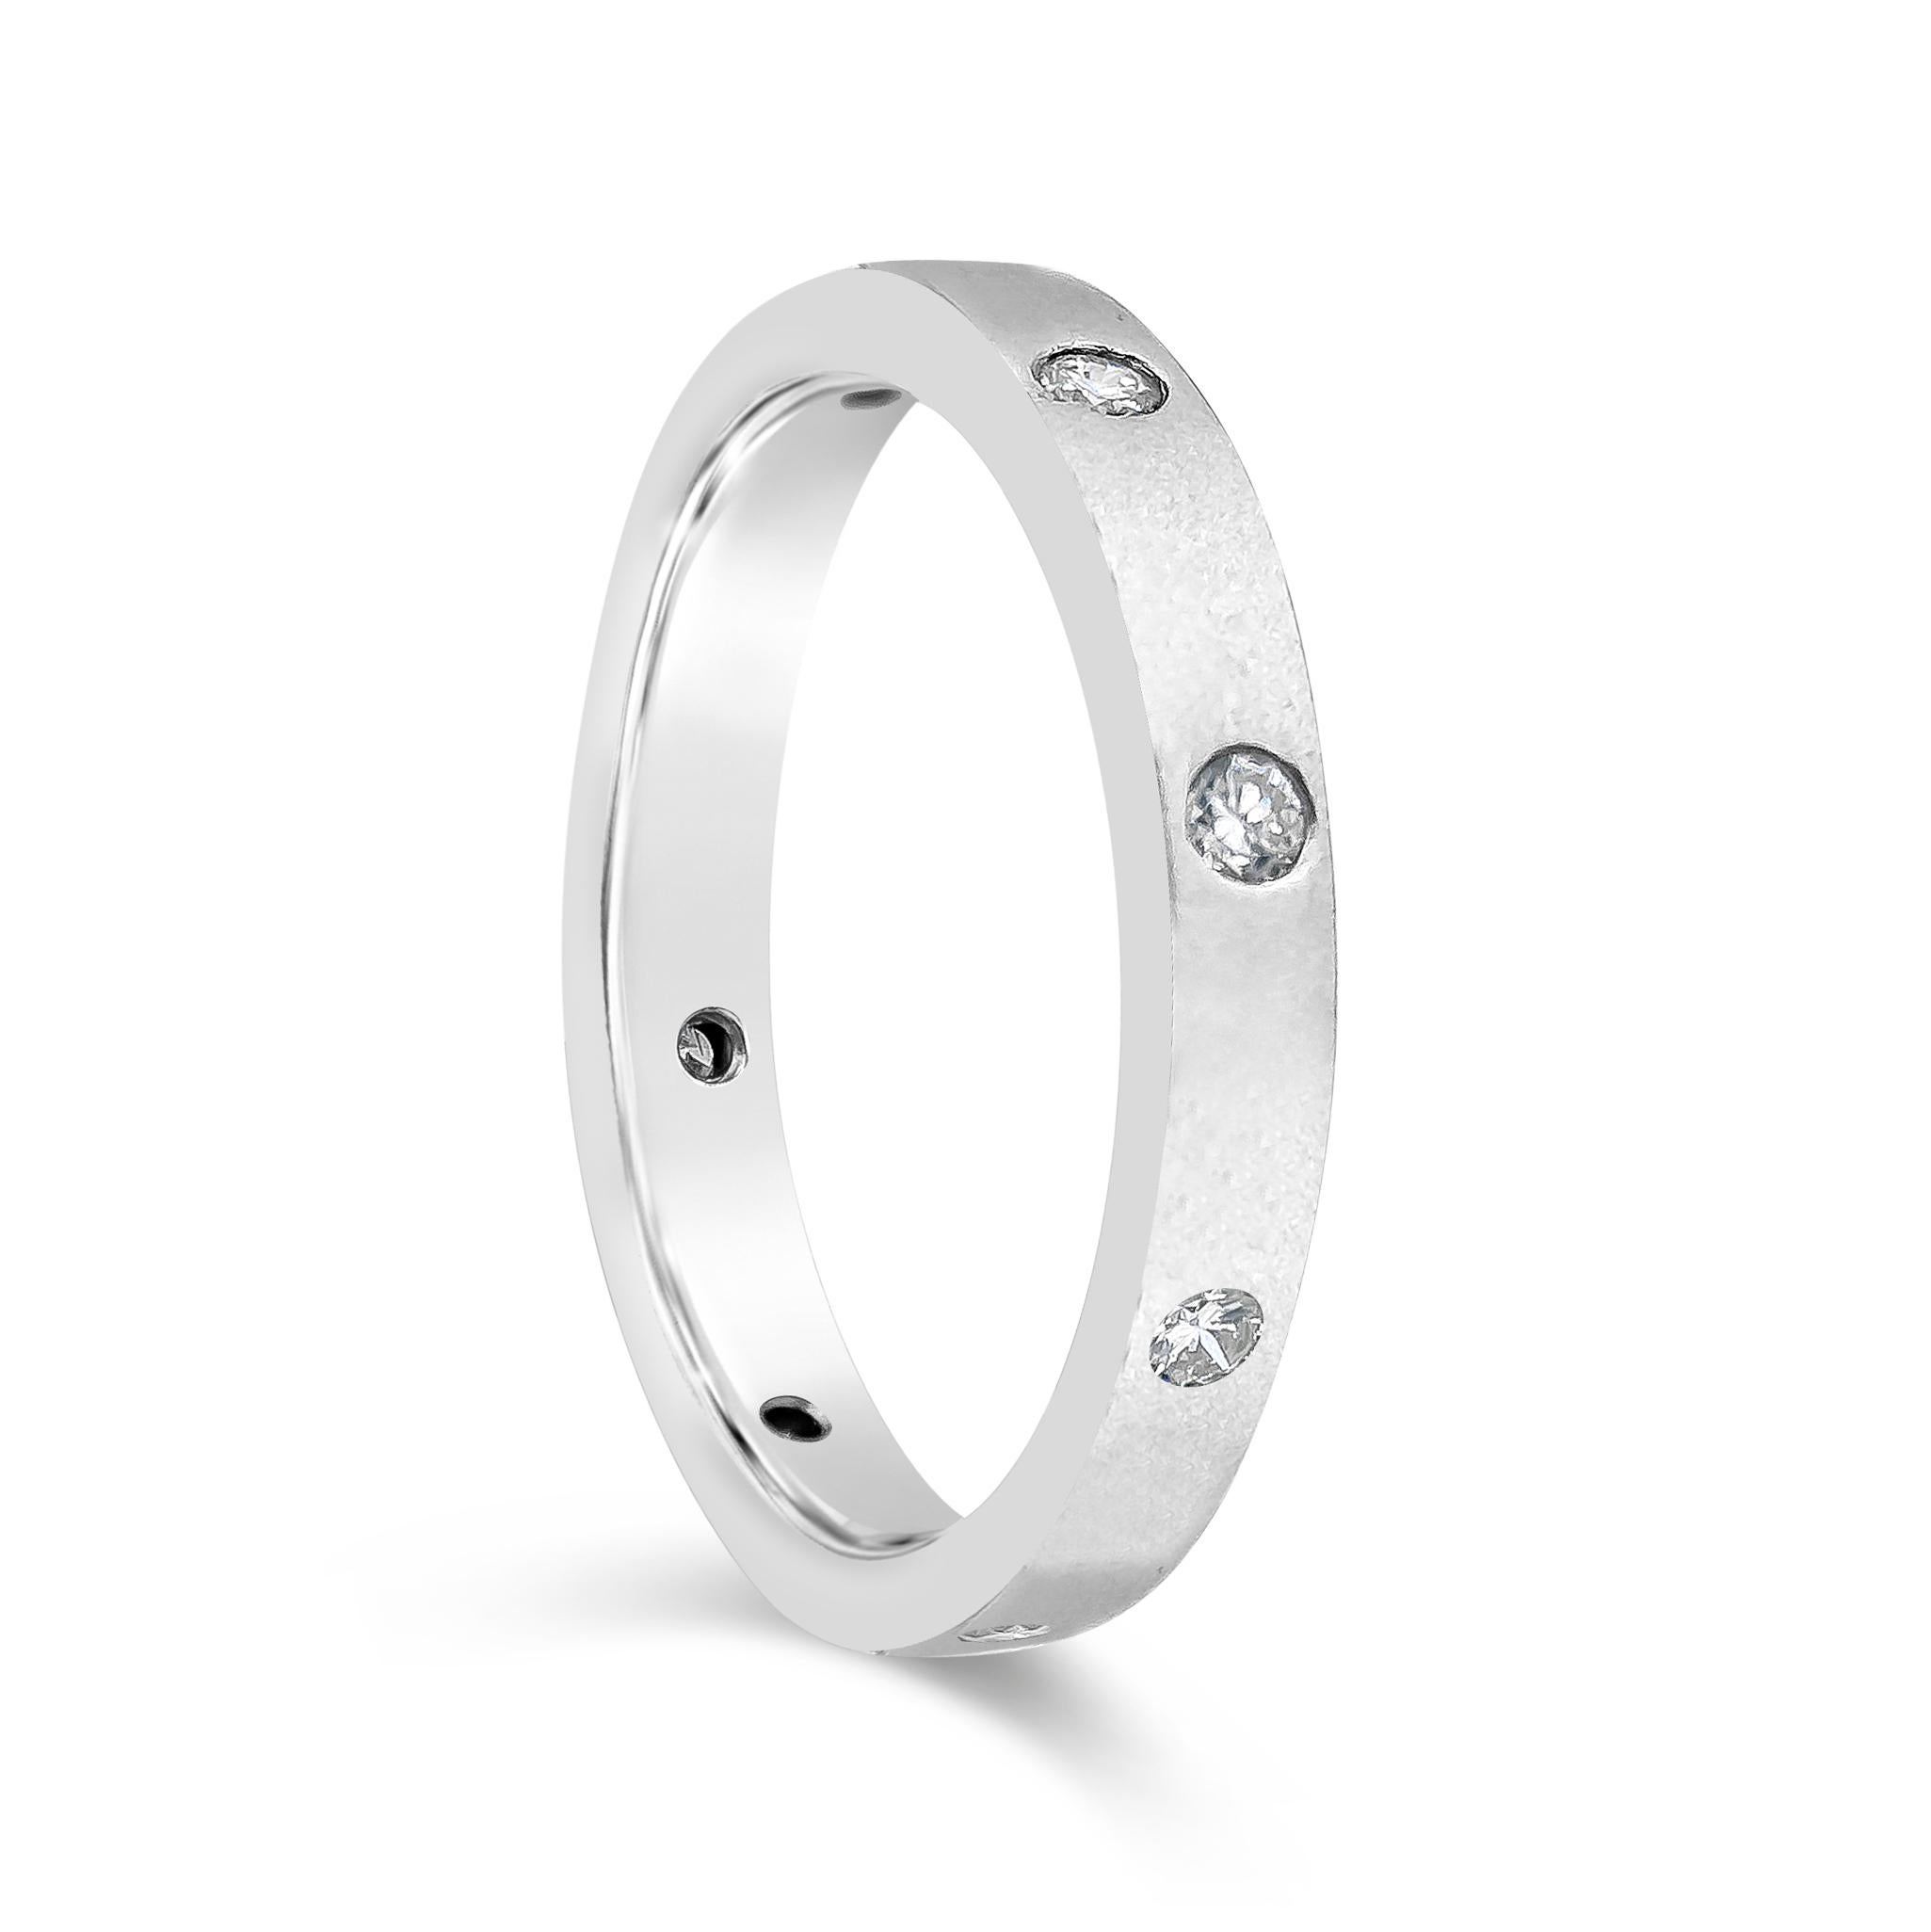 Showcasing an angular wedding band made in 18 karat white gold, flush set with equally-spaced round brilliant diamonds, weighing 0.28 carats total. Matte finish. Size 8 US.

Roman Malakov is a custom house, specializing in creating anything you can